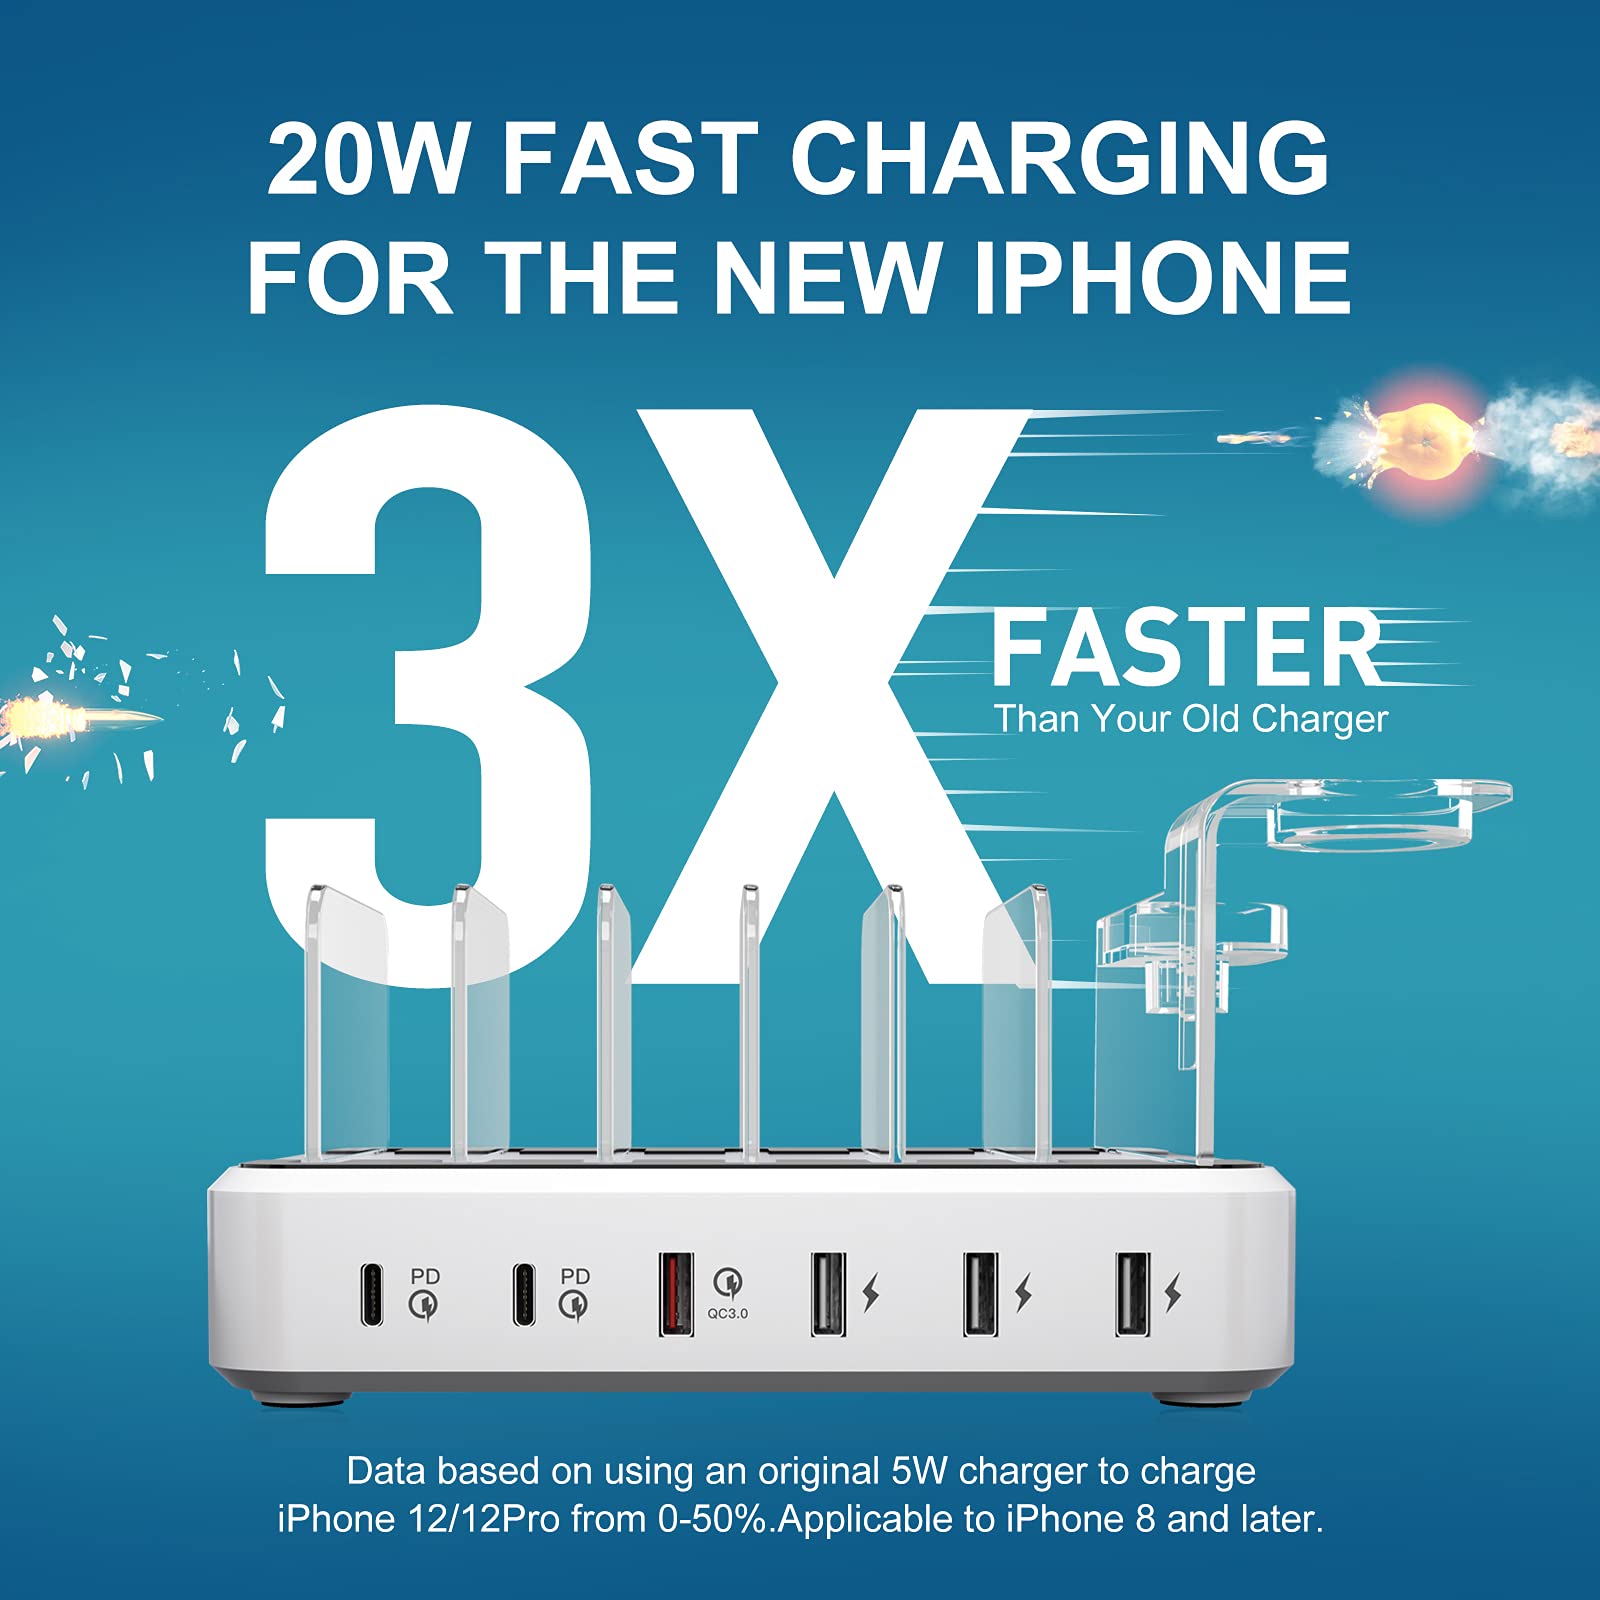 Charging Station - USB C Charger Station, 84W/12A Charging Station for Multiple Devices, Upgraded QC3.0 & PD 6 Ports Charging Dock,Fast Charging Station for Apple iOS/Android iPhone iPad Phone Tablets